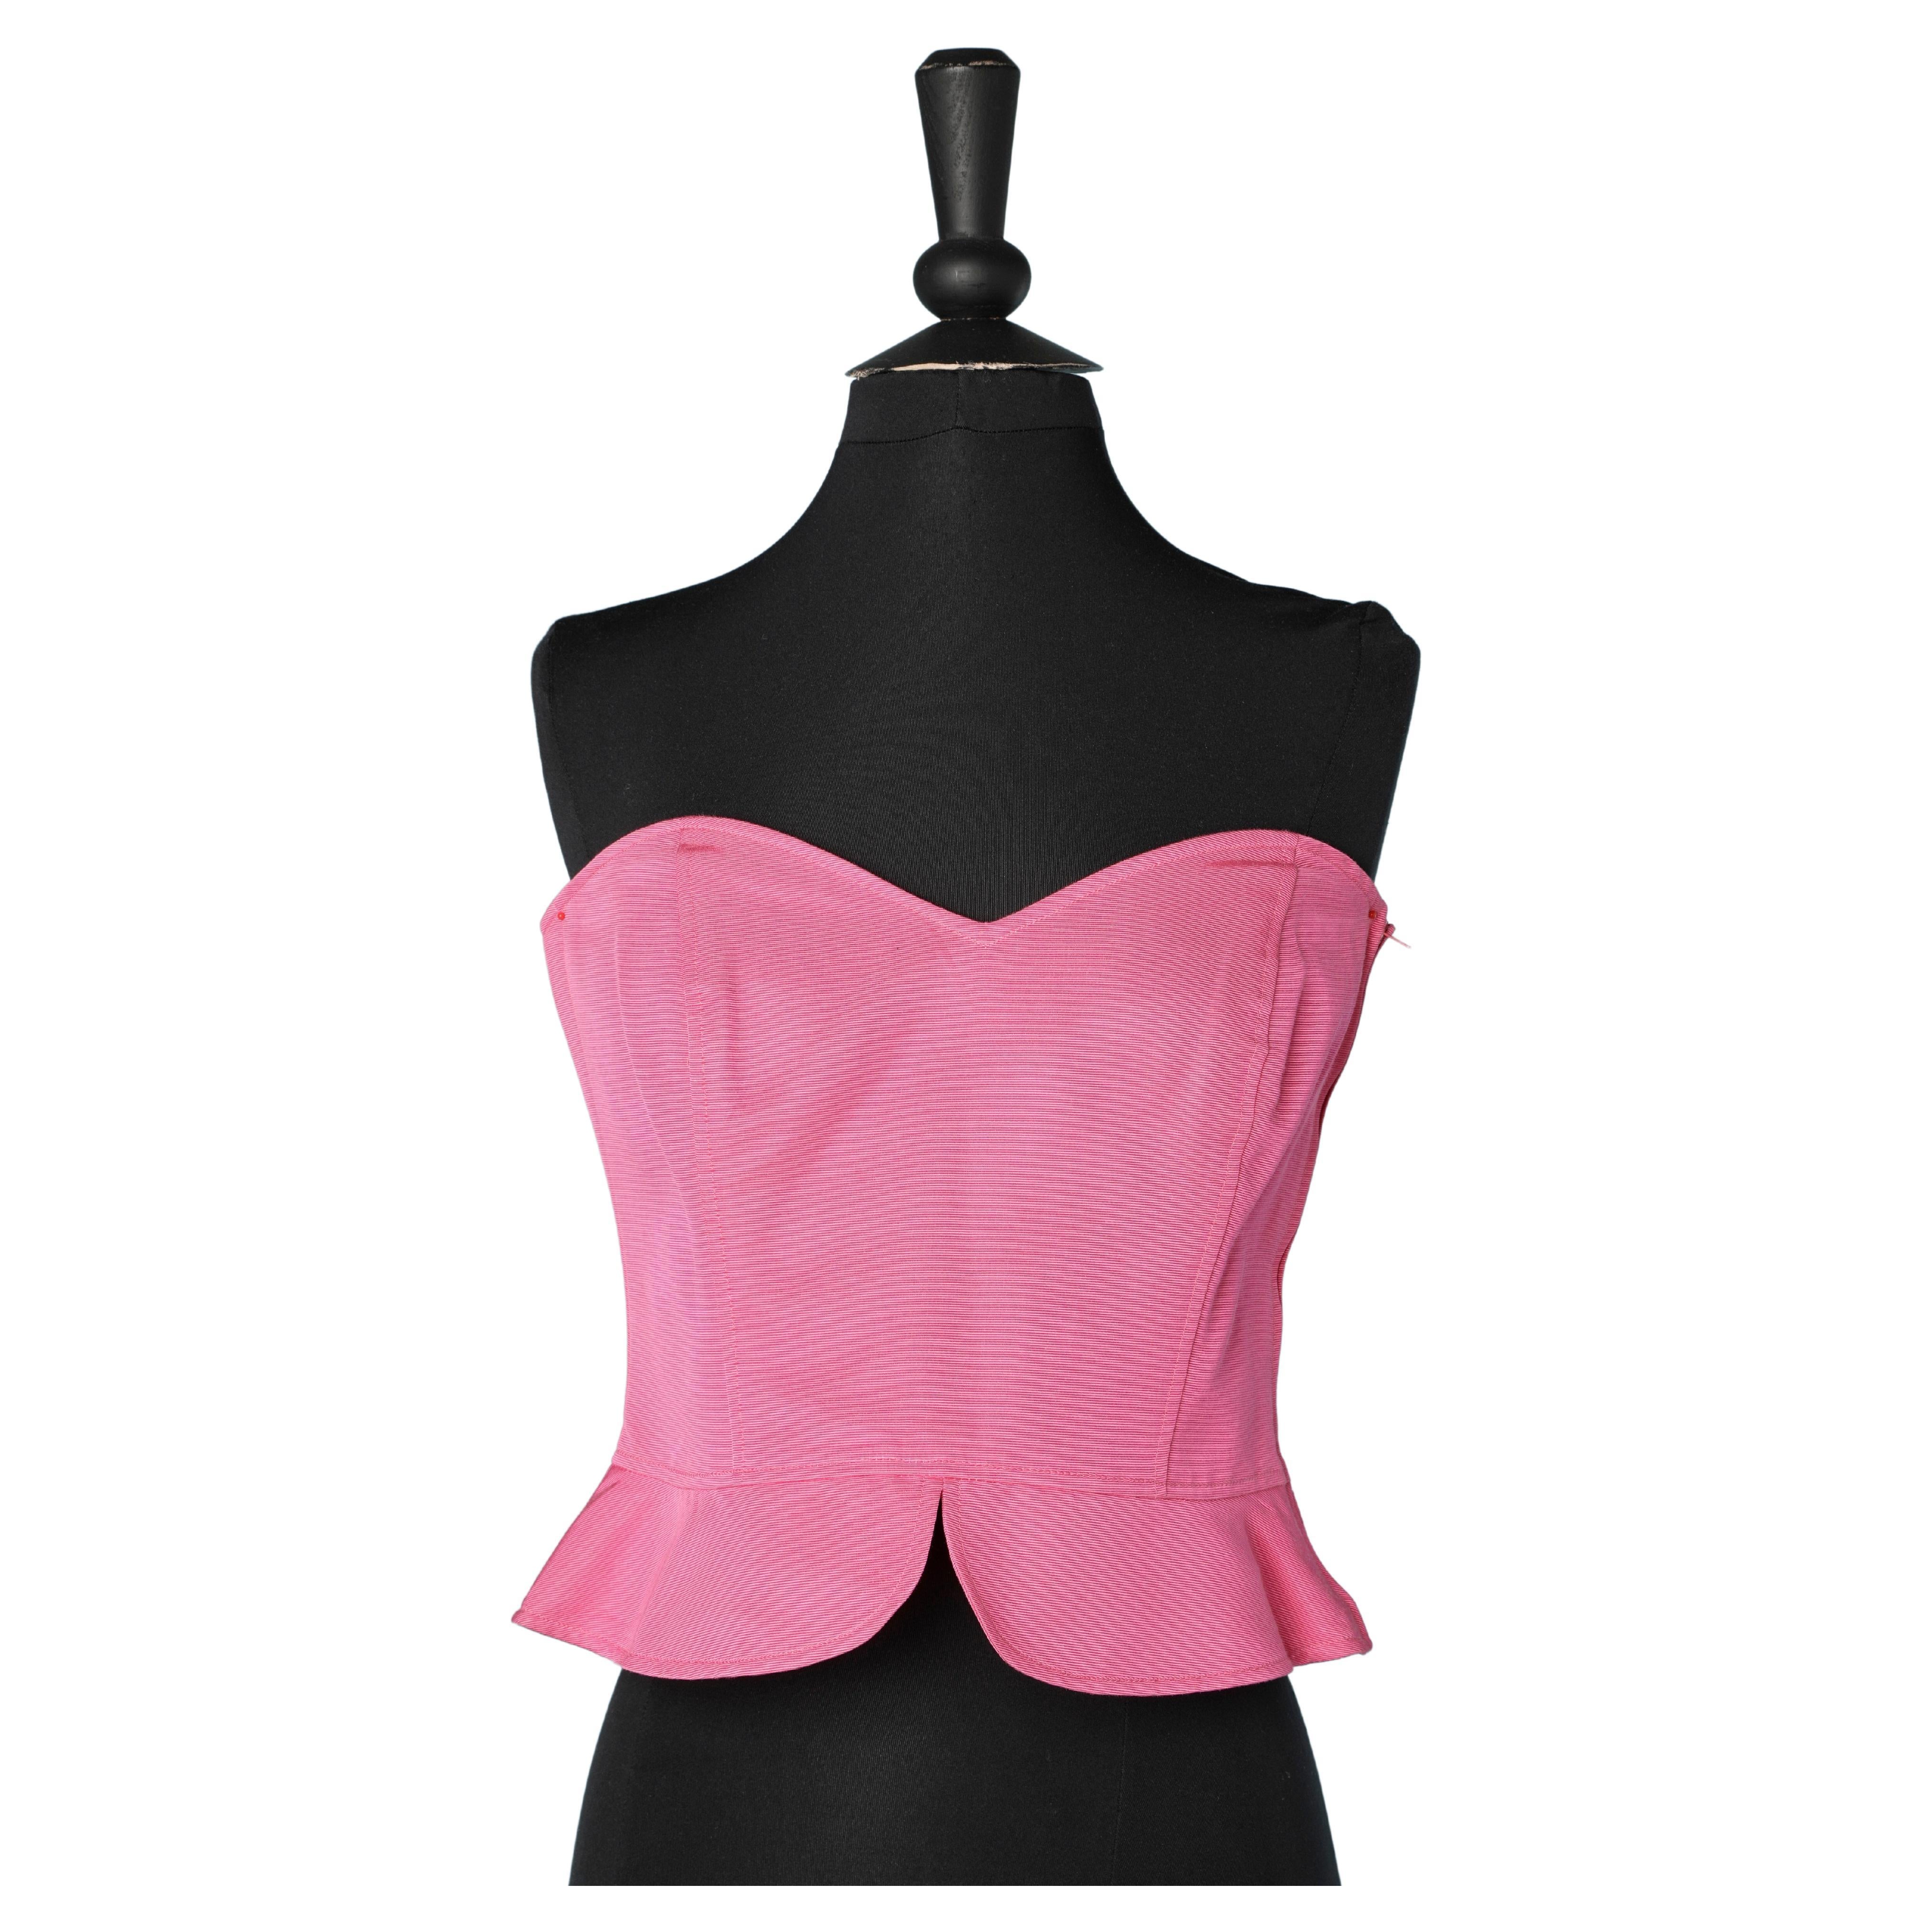 Pink cotton & rayon boned bustier UNGARO SOLO DONNA New with tag For Sale